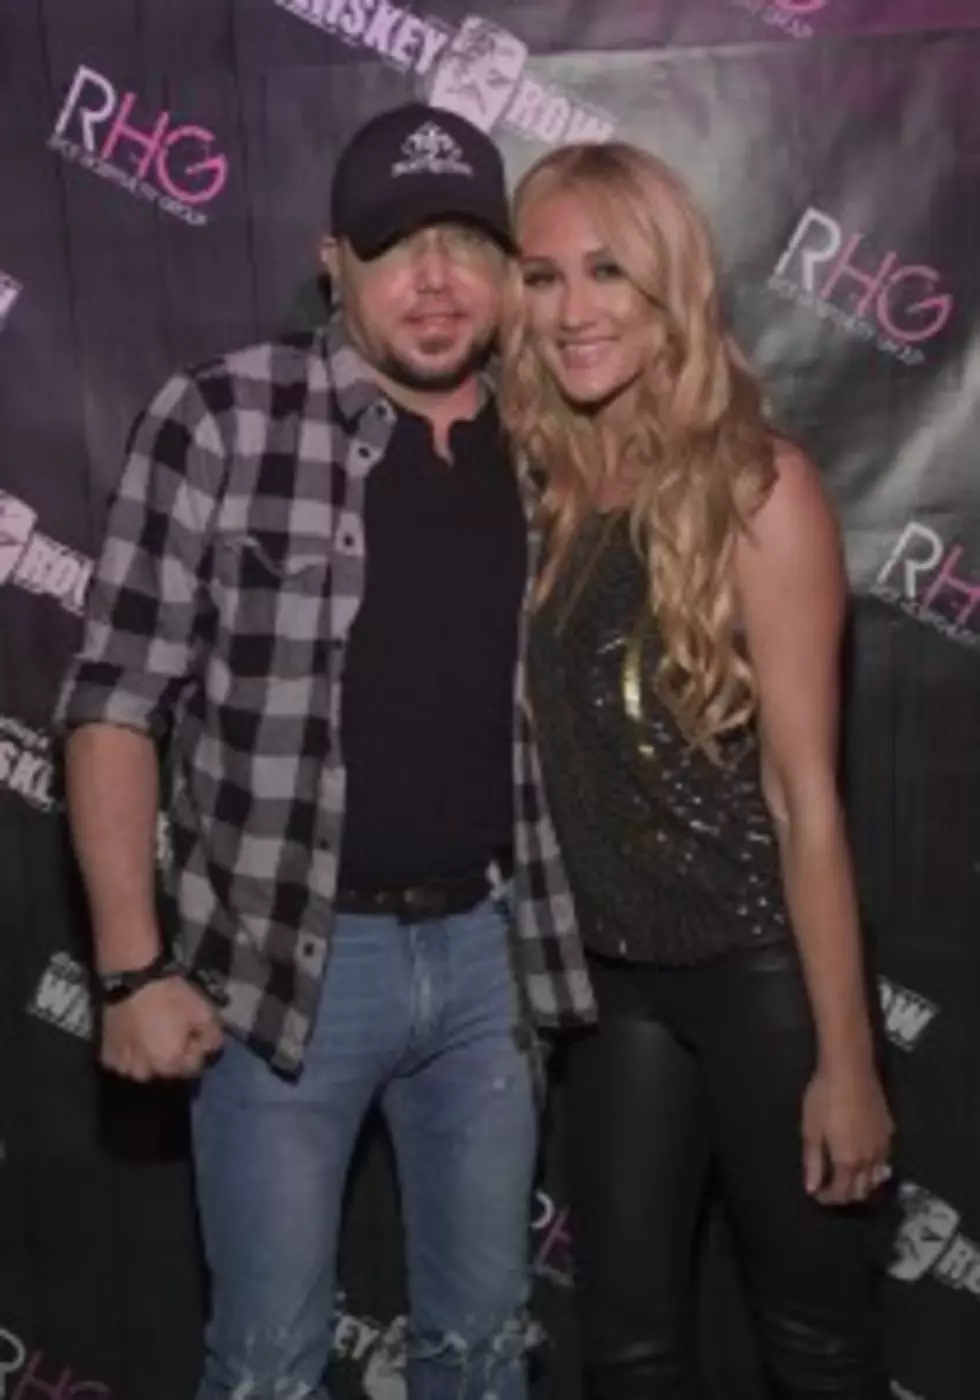 Jason Aldean + Brittany Kerr Tie The Knot In Mexico